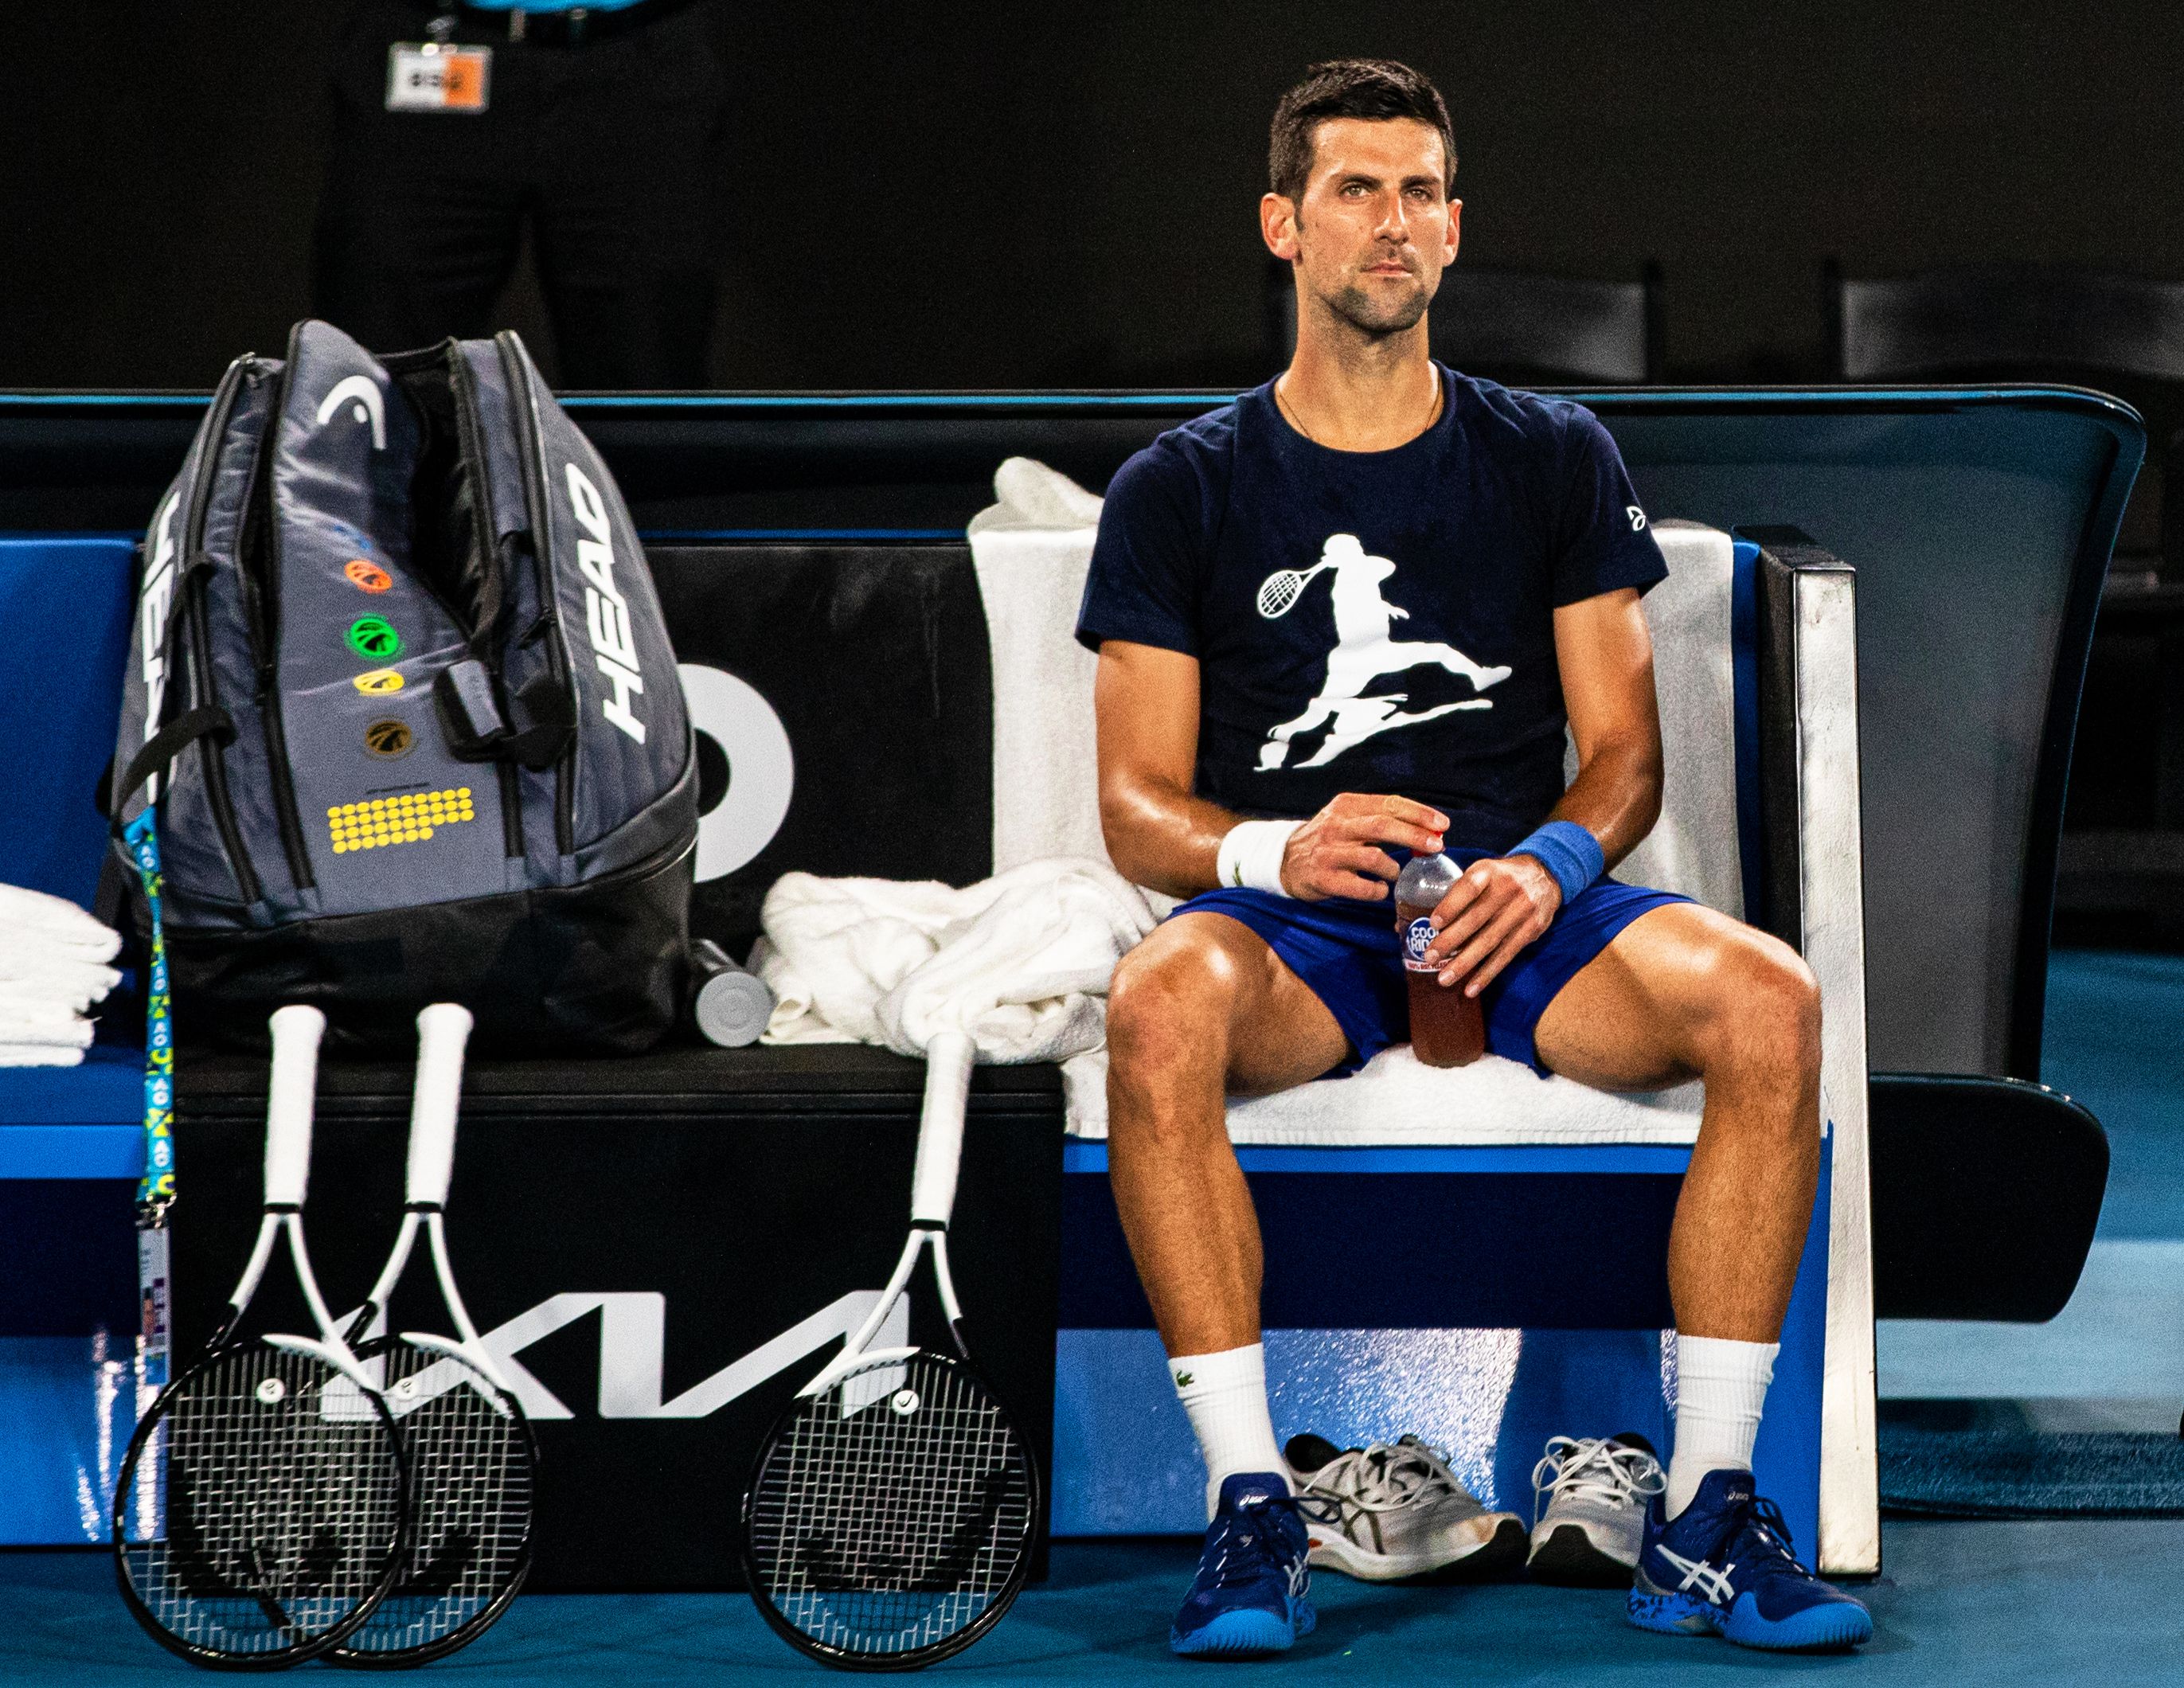 Novak Djokovic of Serbia rests during a practice session ahead of the Australian Open Grand Slam tennis tournament at Melbourne Park in Melbourne, Australia on 14 January.